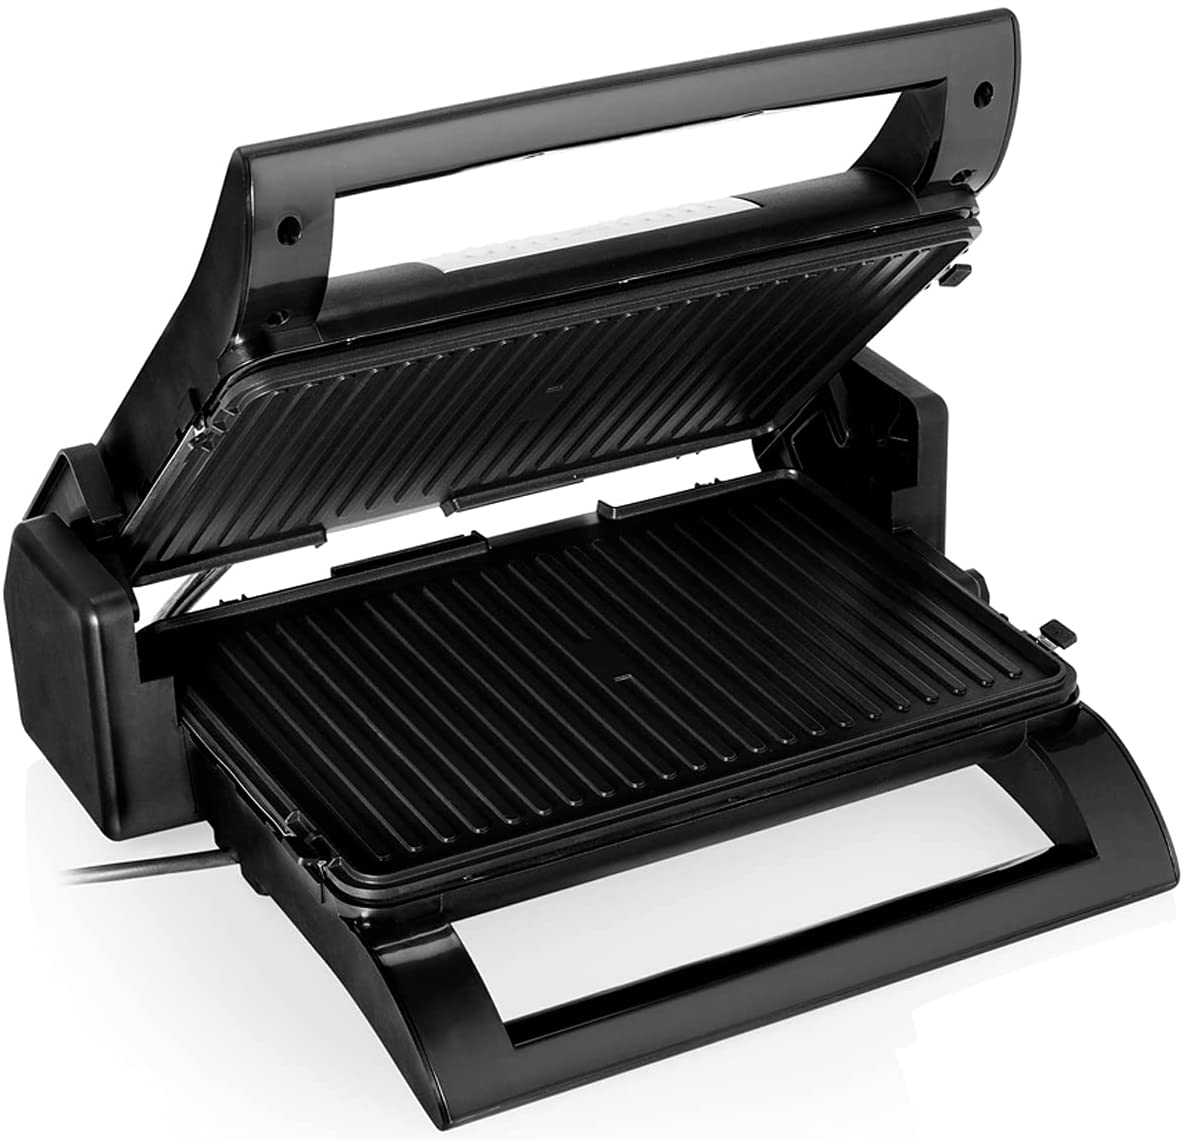 Nova Contact grill, table grill, waffle iron and sandwich maker 4-in-1 interchangeable plates, 31.5 x 21.5 cm